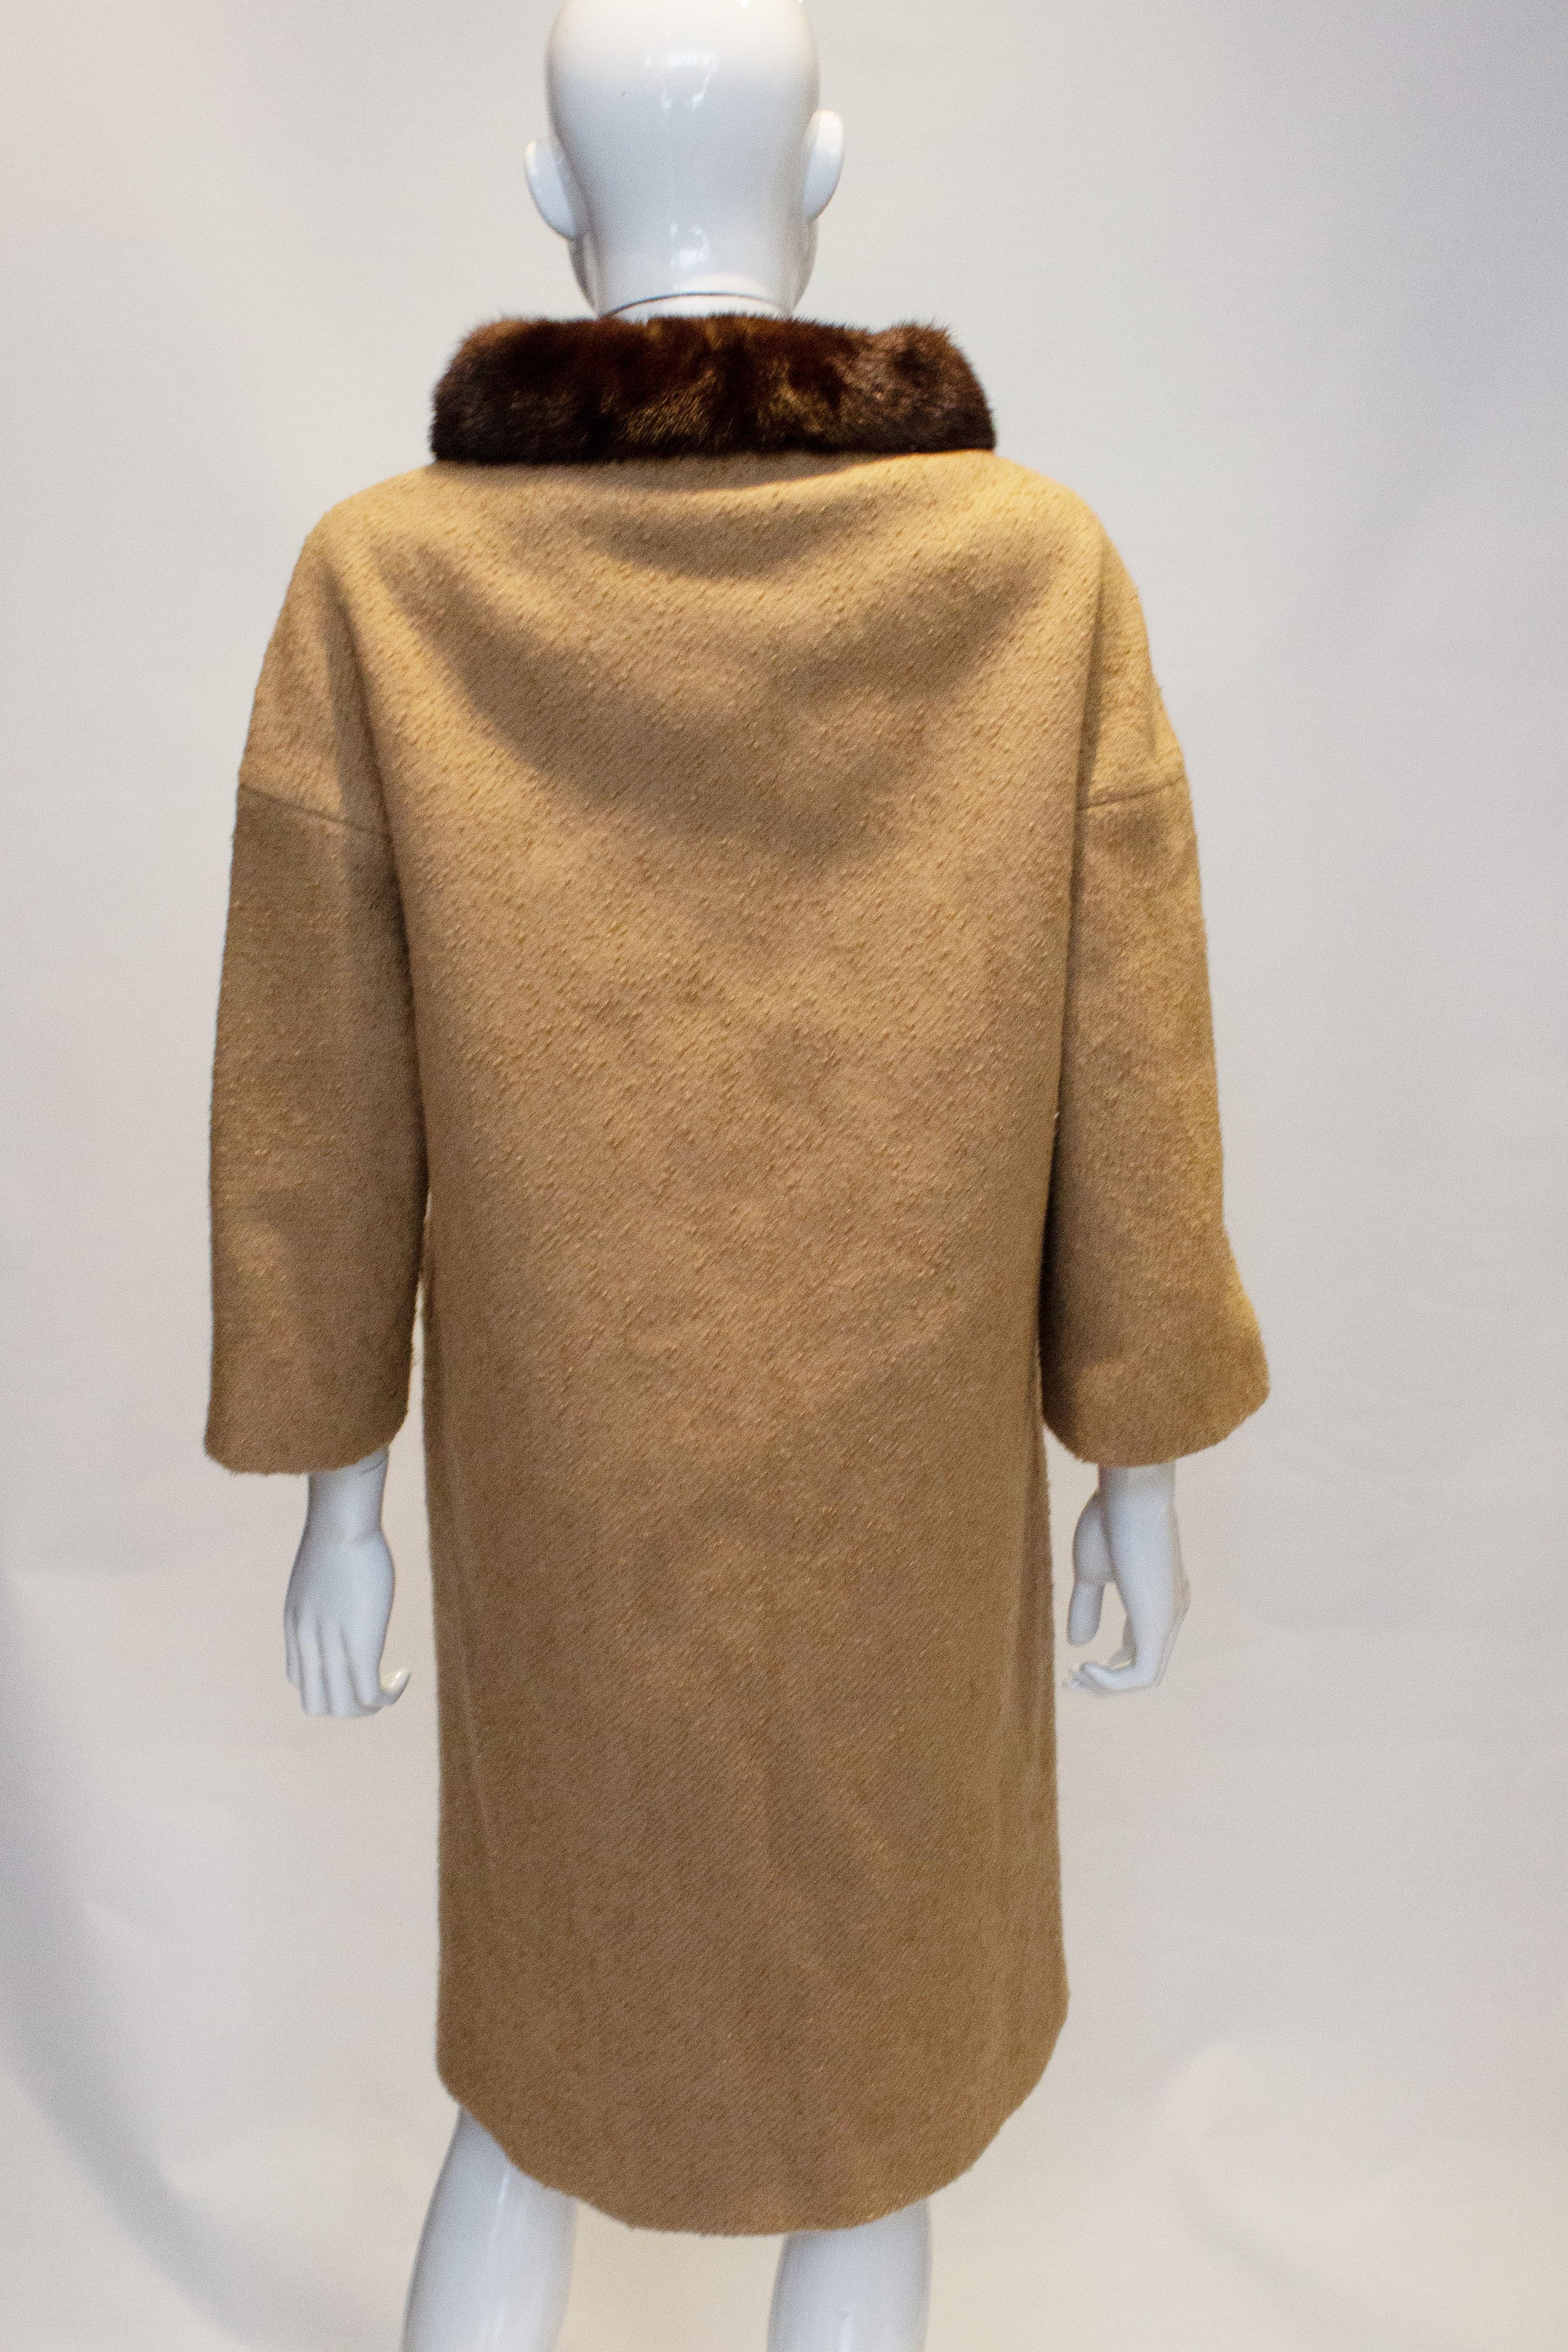 Women's Vintage Caramel Wool and Mink Coat by Jeshiva For Sale